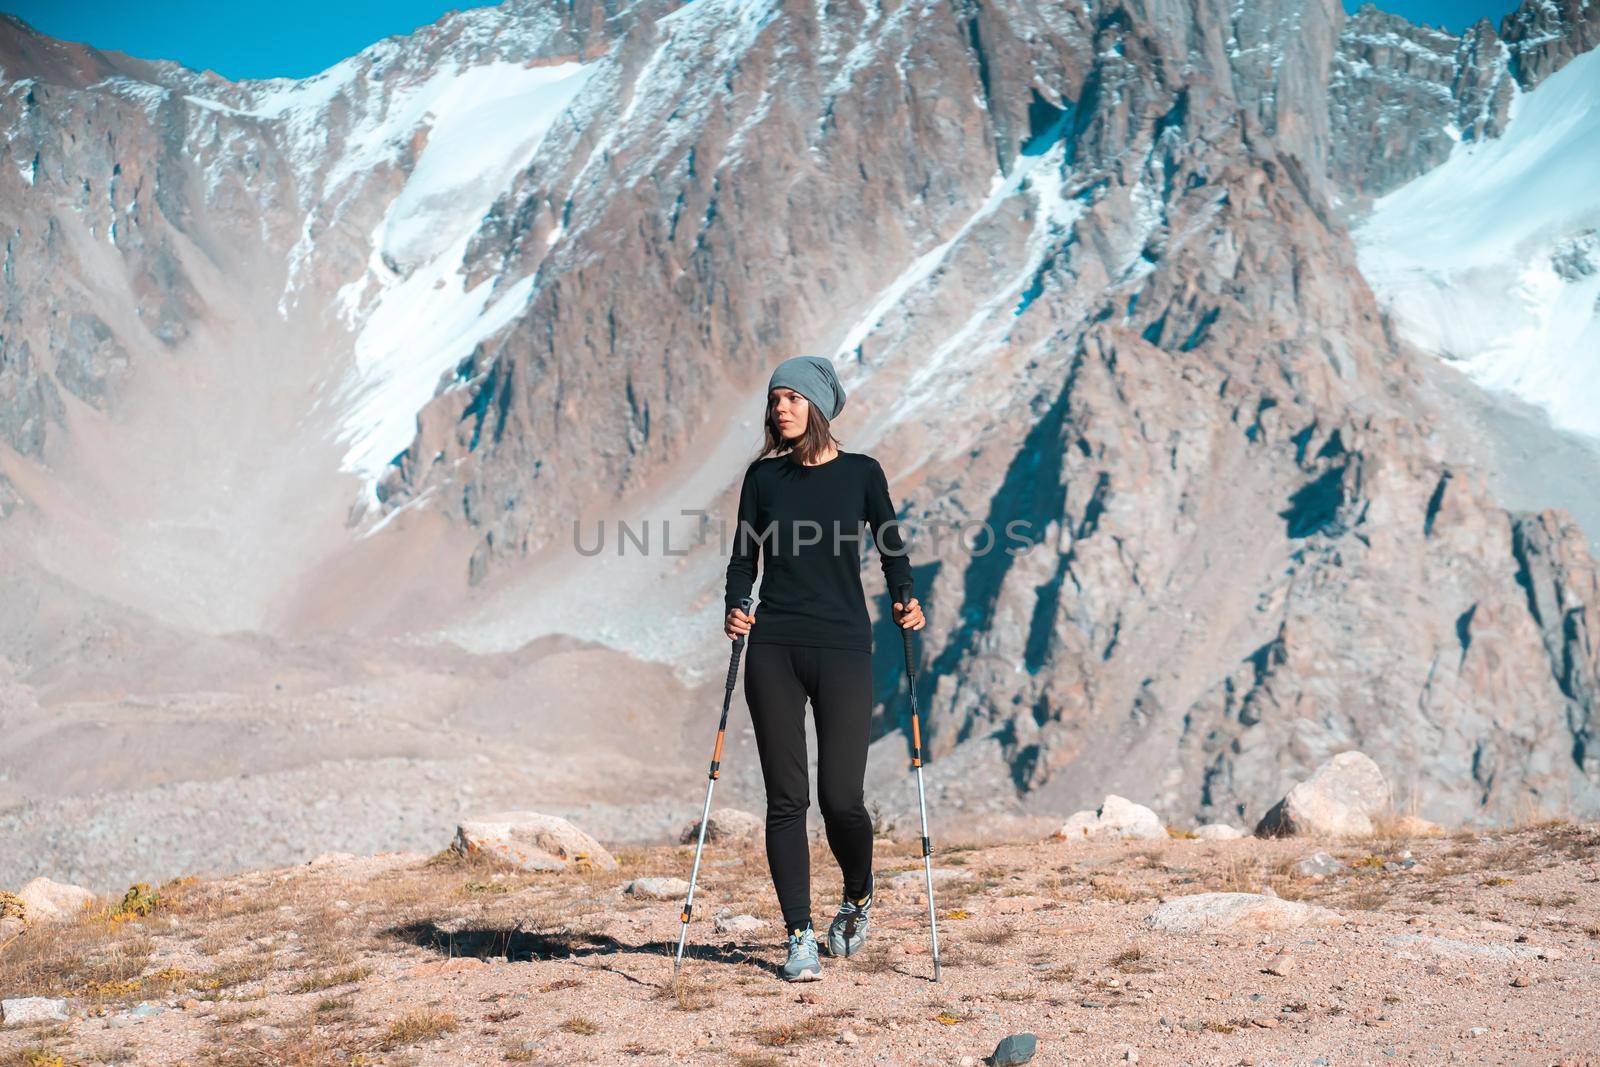 A young beautiful sports girl in thermal underwear with trekking poles walks along the trail among the snow-capped high peaks of the mountains, the traveler walks and climbs tin the national park.